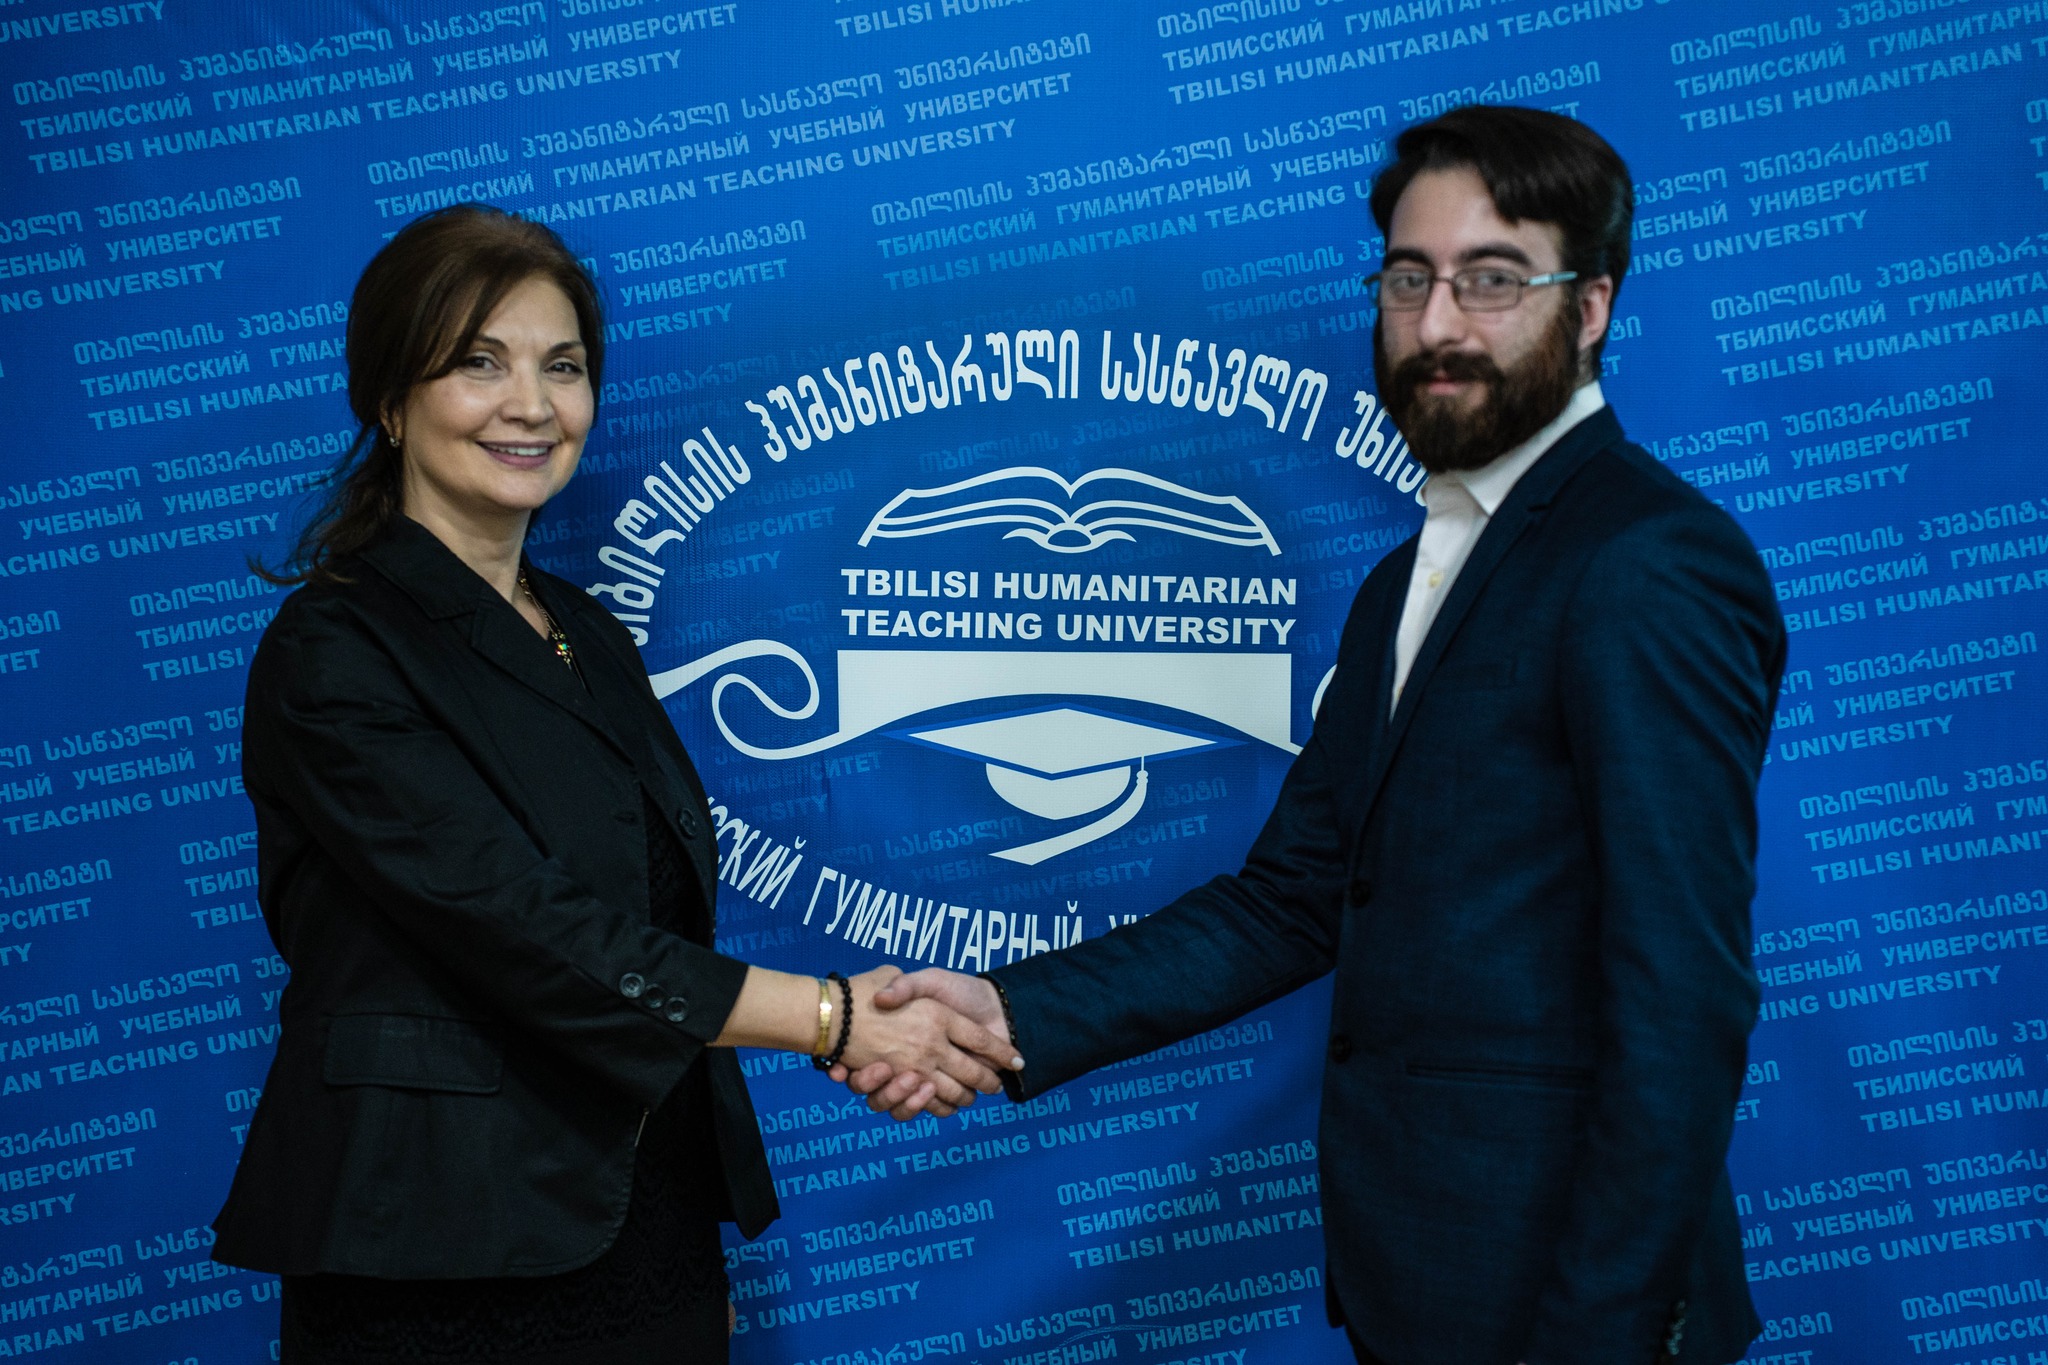  a memorandum of agreement was signed by the Lawyer-Psychologists Group and Tbilisi Humanitarian Education University.